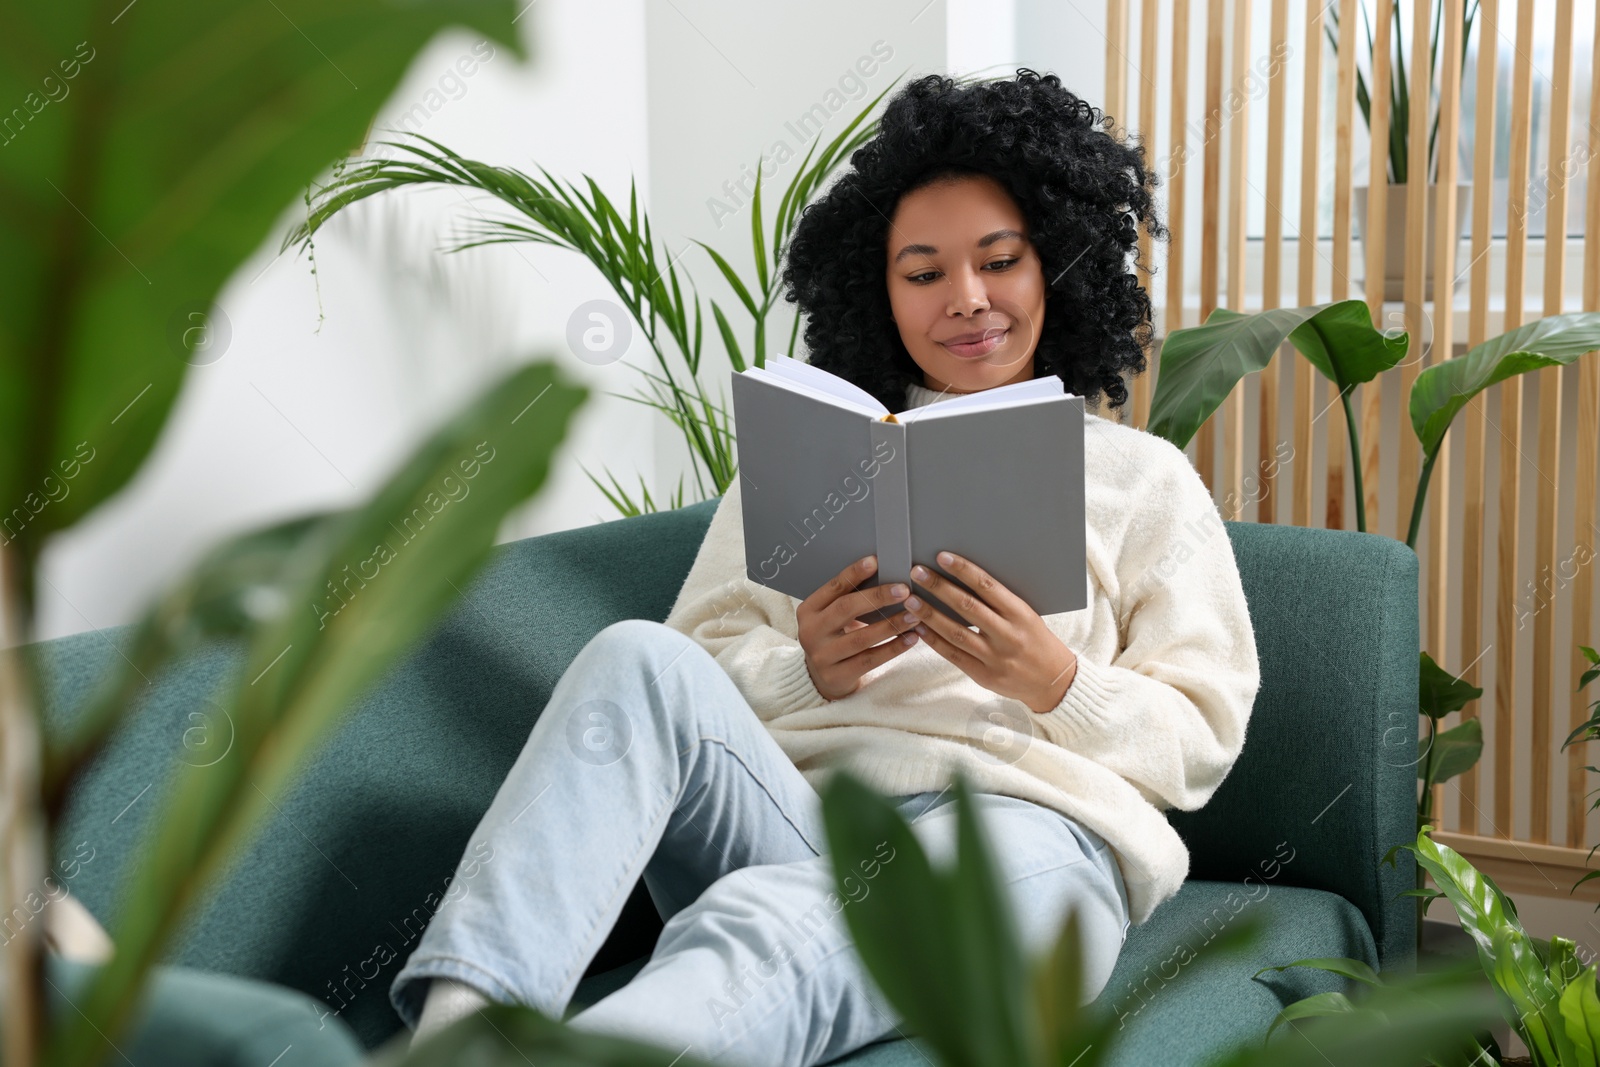 Photo of Relaxing atmosphere. Woman reading book on sofa surrounded by beautiful houseplants in room